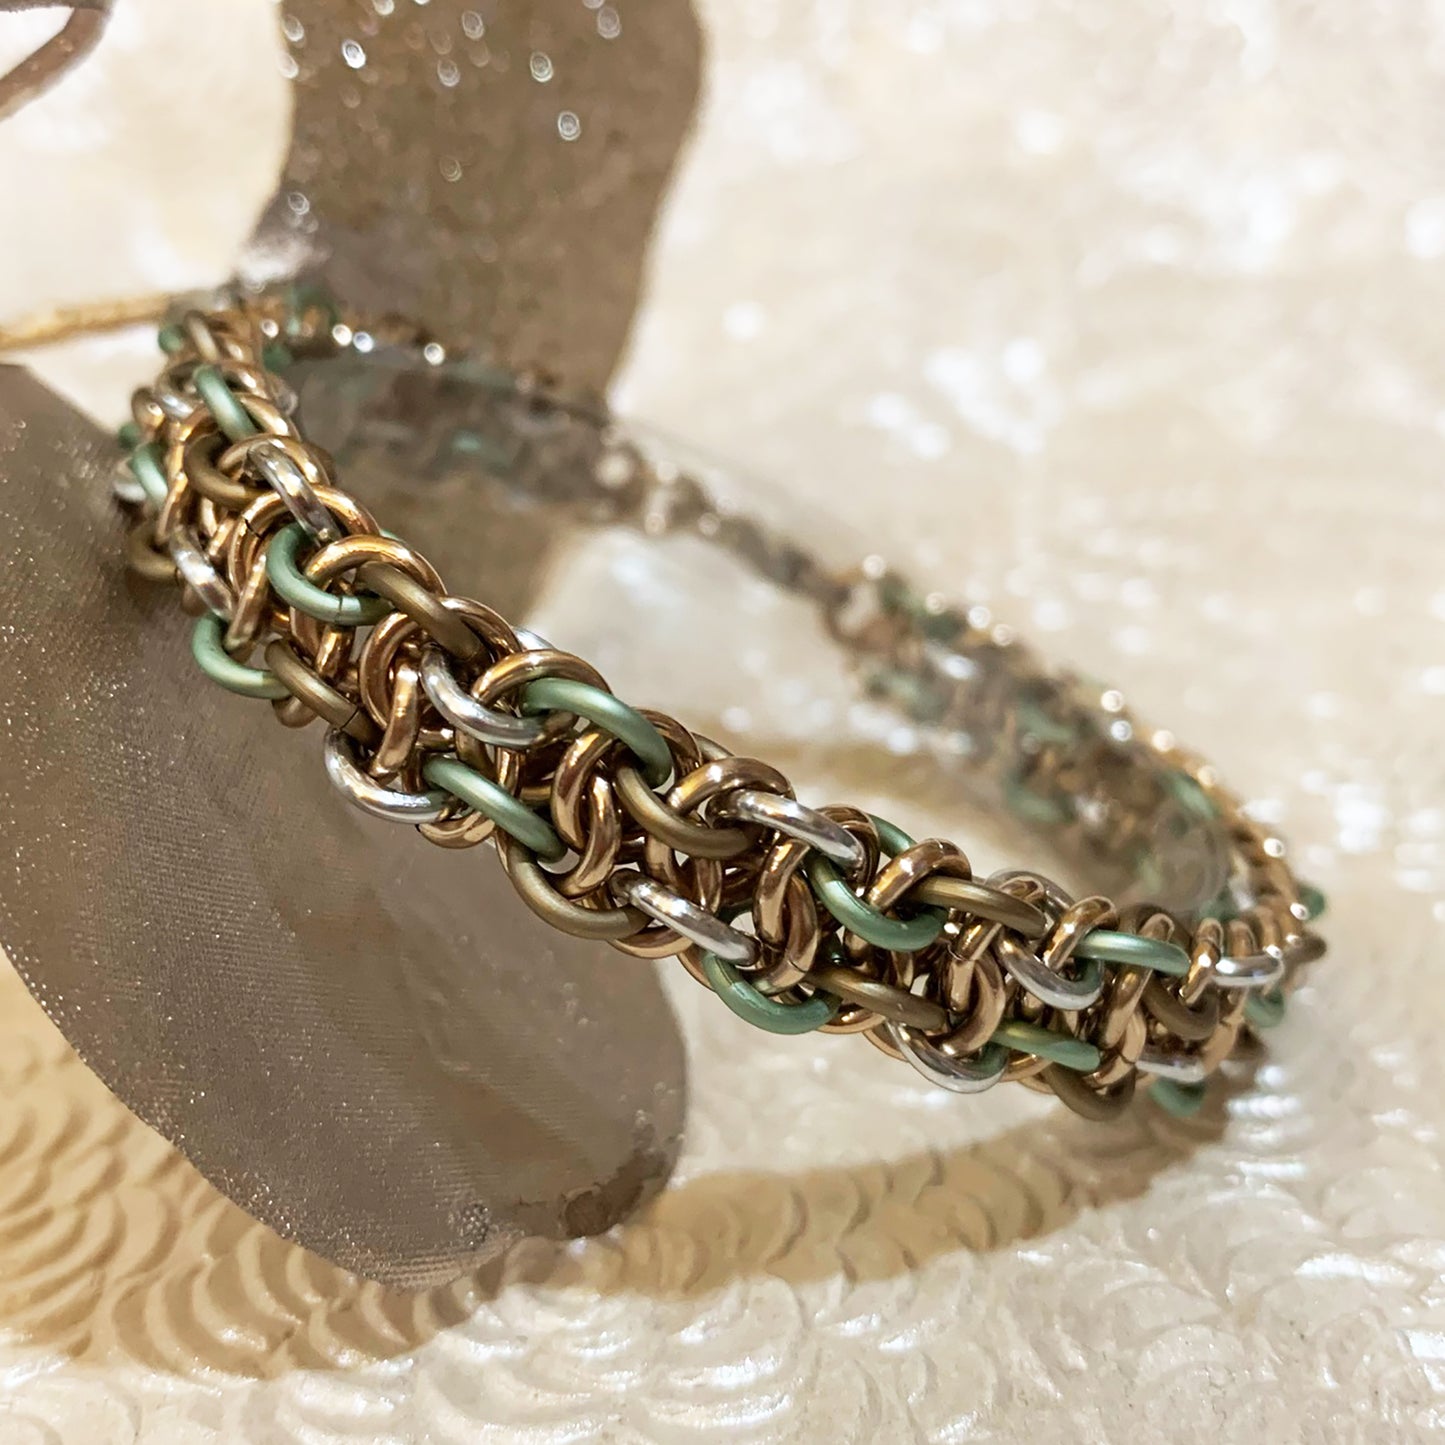 Vipera Berus Bracelet Kit with FREE video Mt Seafoam Mt Champagne Silver and Rose Gold